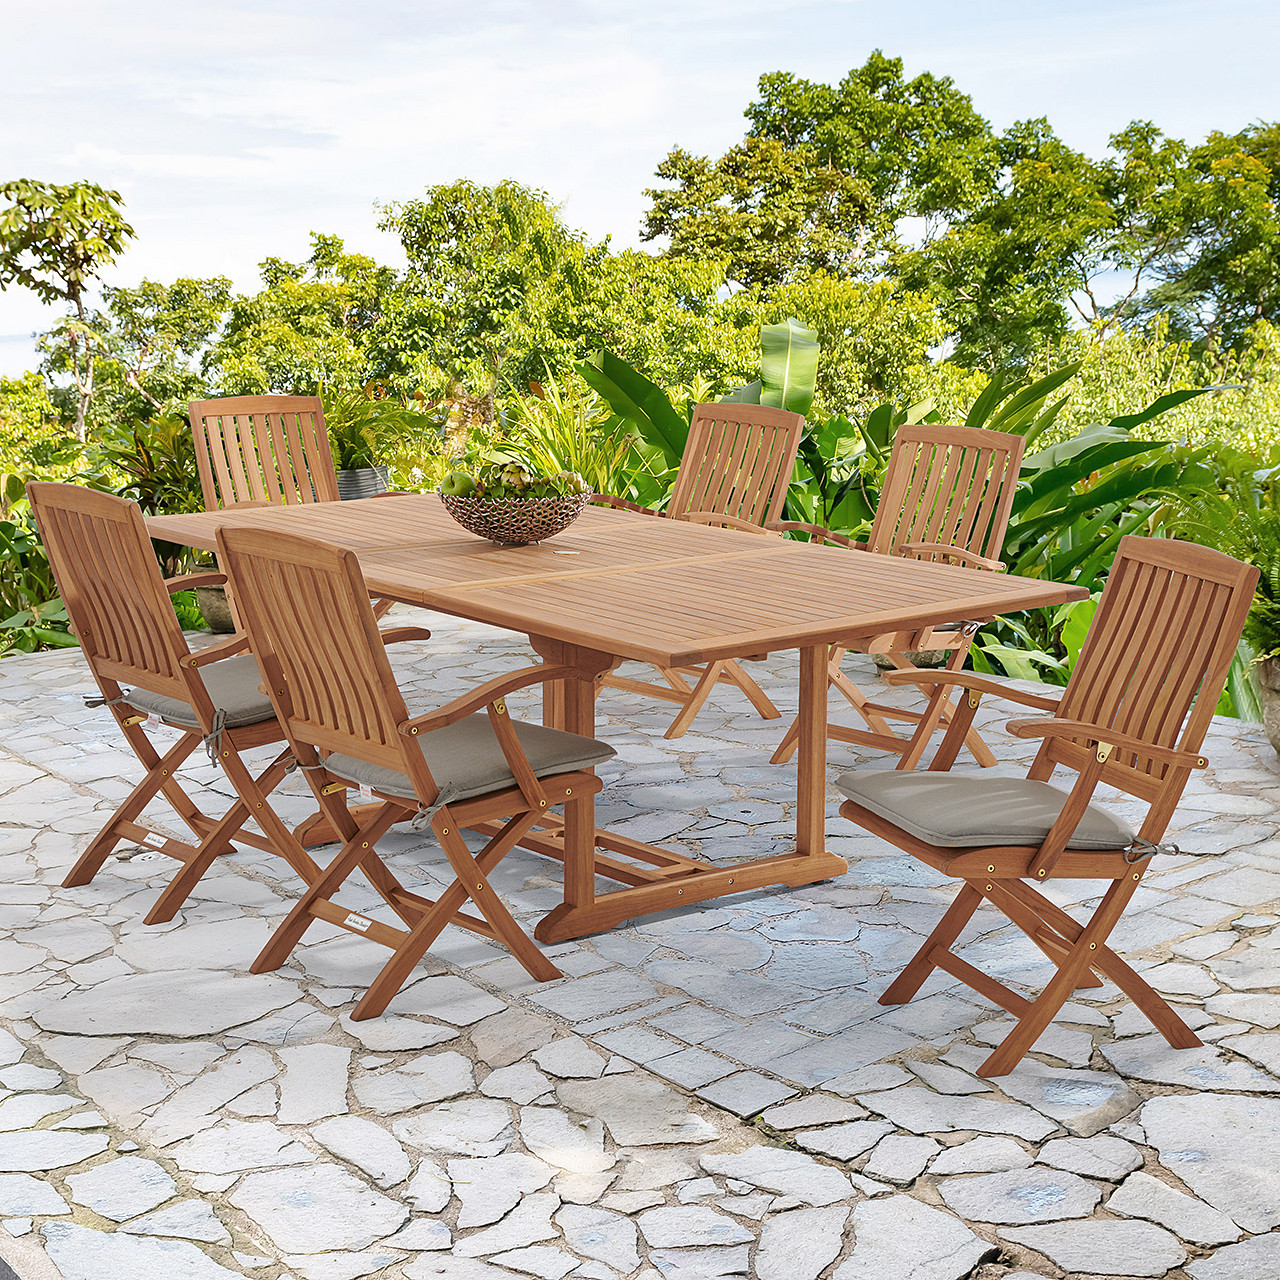 Westport Teak with Cushions 7 Piece Arm Dining Set + Bristol 67-87 x 47 in. Extension Table